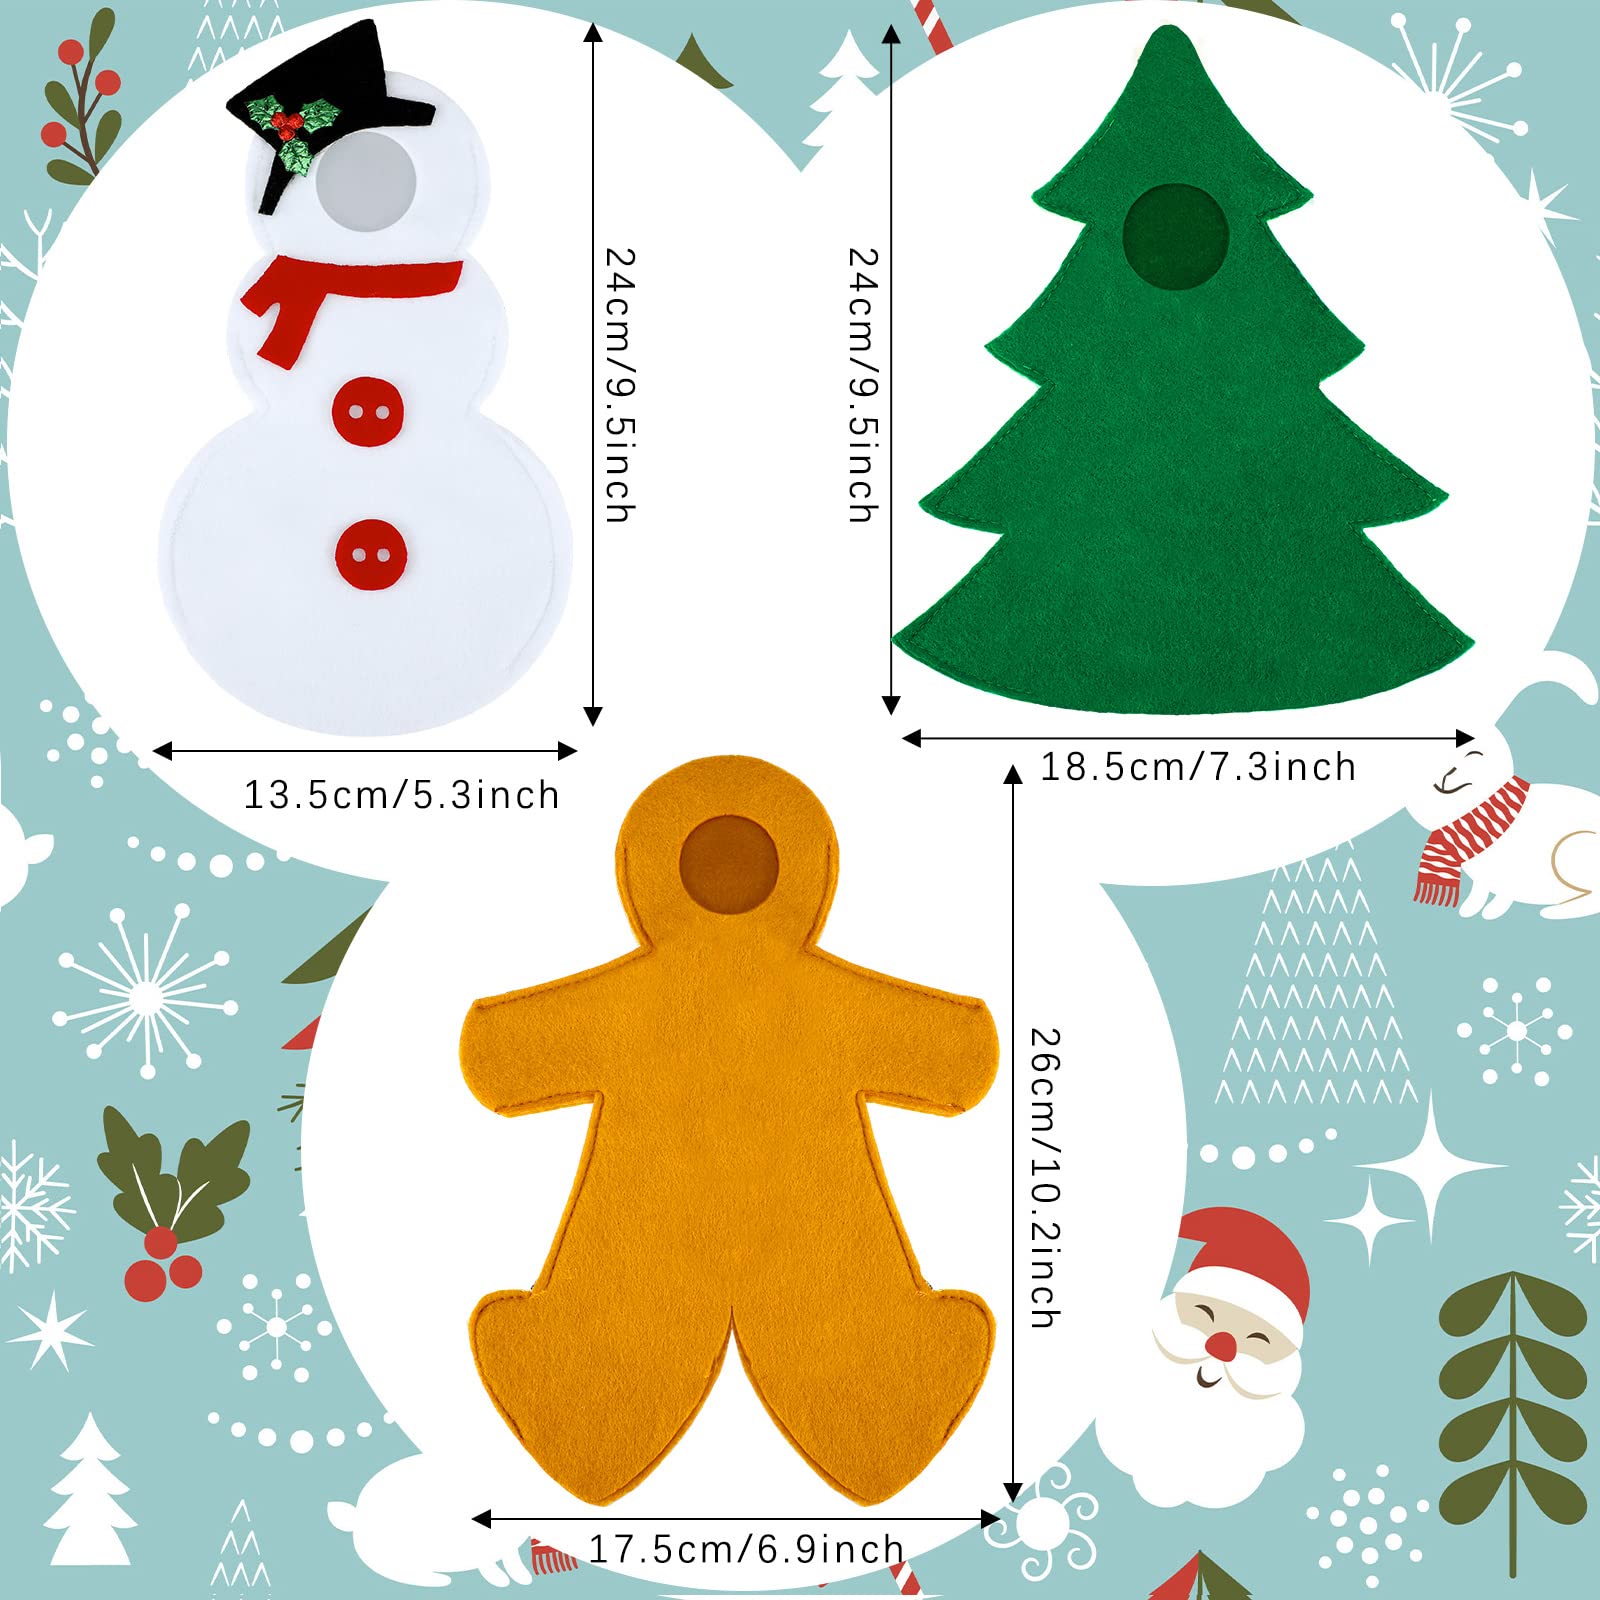 Christmas Elf Accessories Clothes, 3 Pieces Elf Doll Costume Lovely Snowman Gingerbread Man Christmas Tree Hamburger Pizza Elf Doll Outfits for Boy or Girl Elf Doll (Snowman)